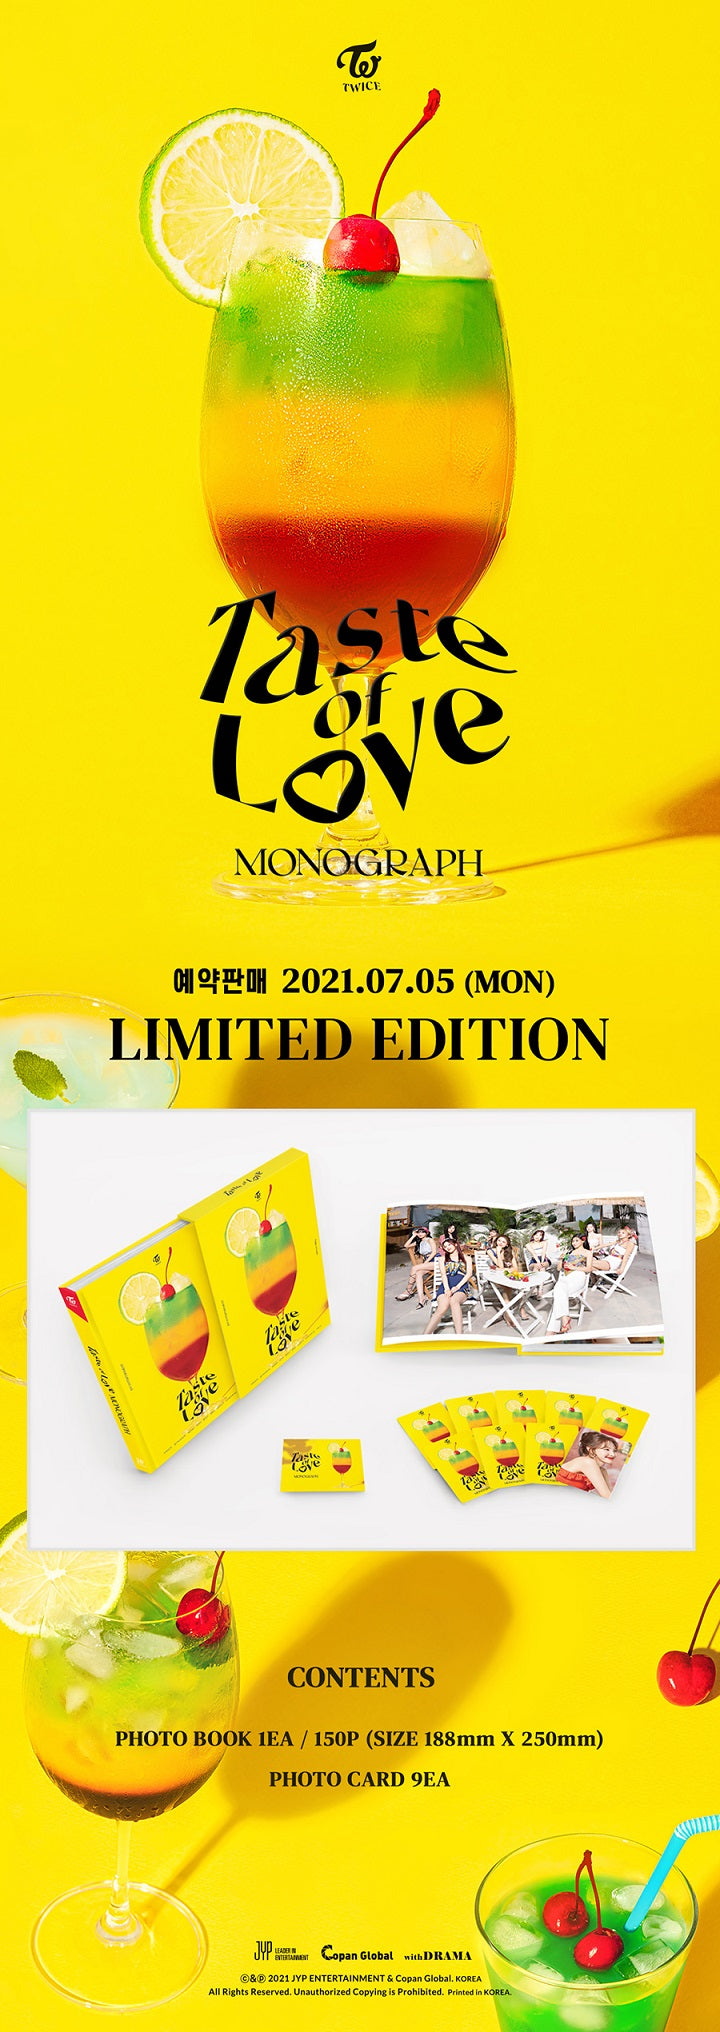 1 Photo Book (150 pages)
9 Photo Cards